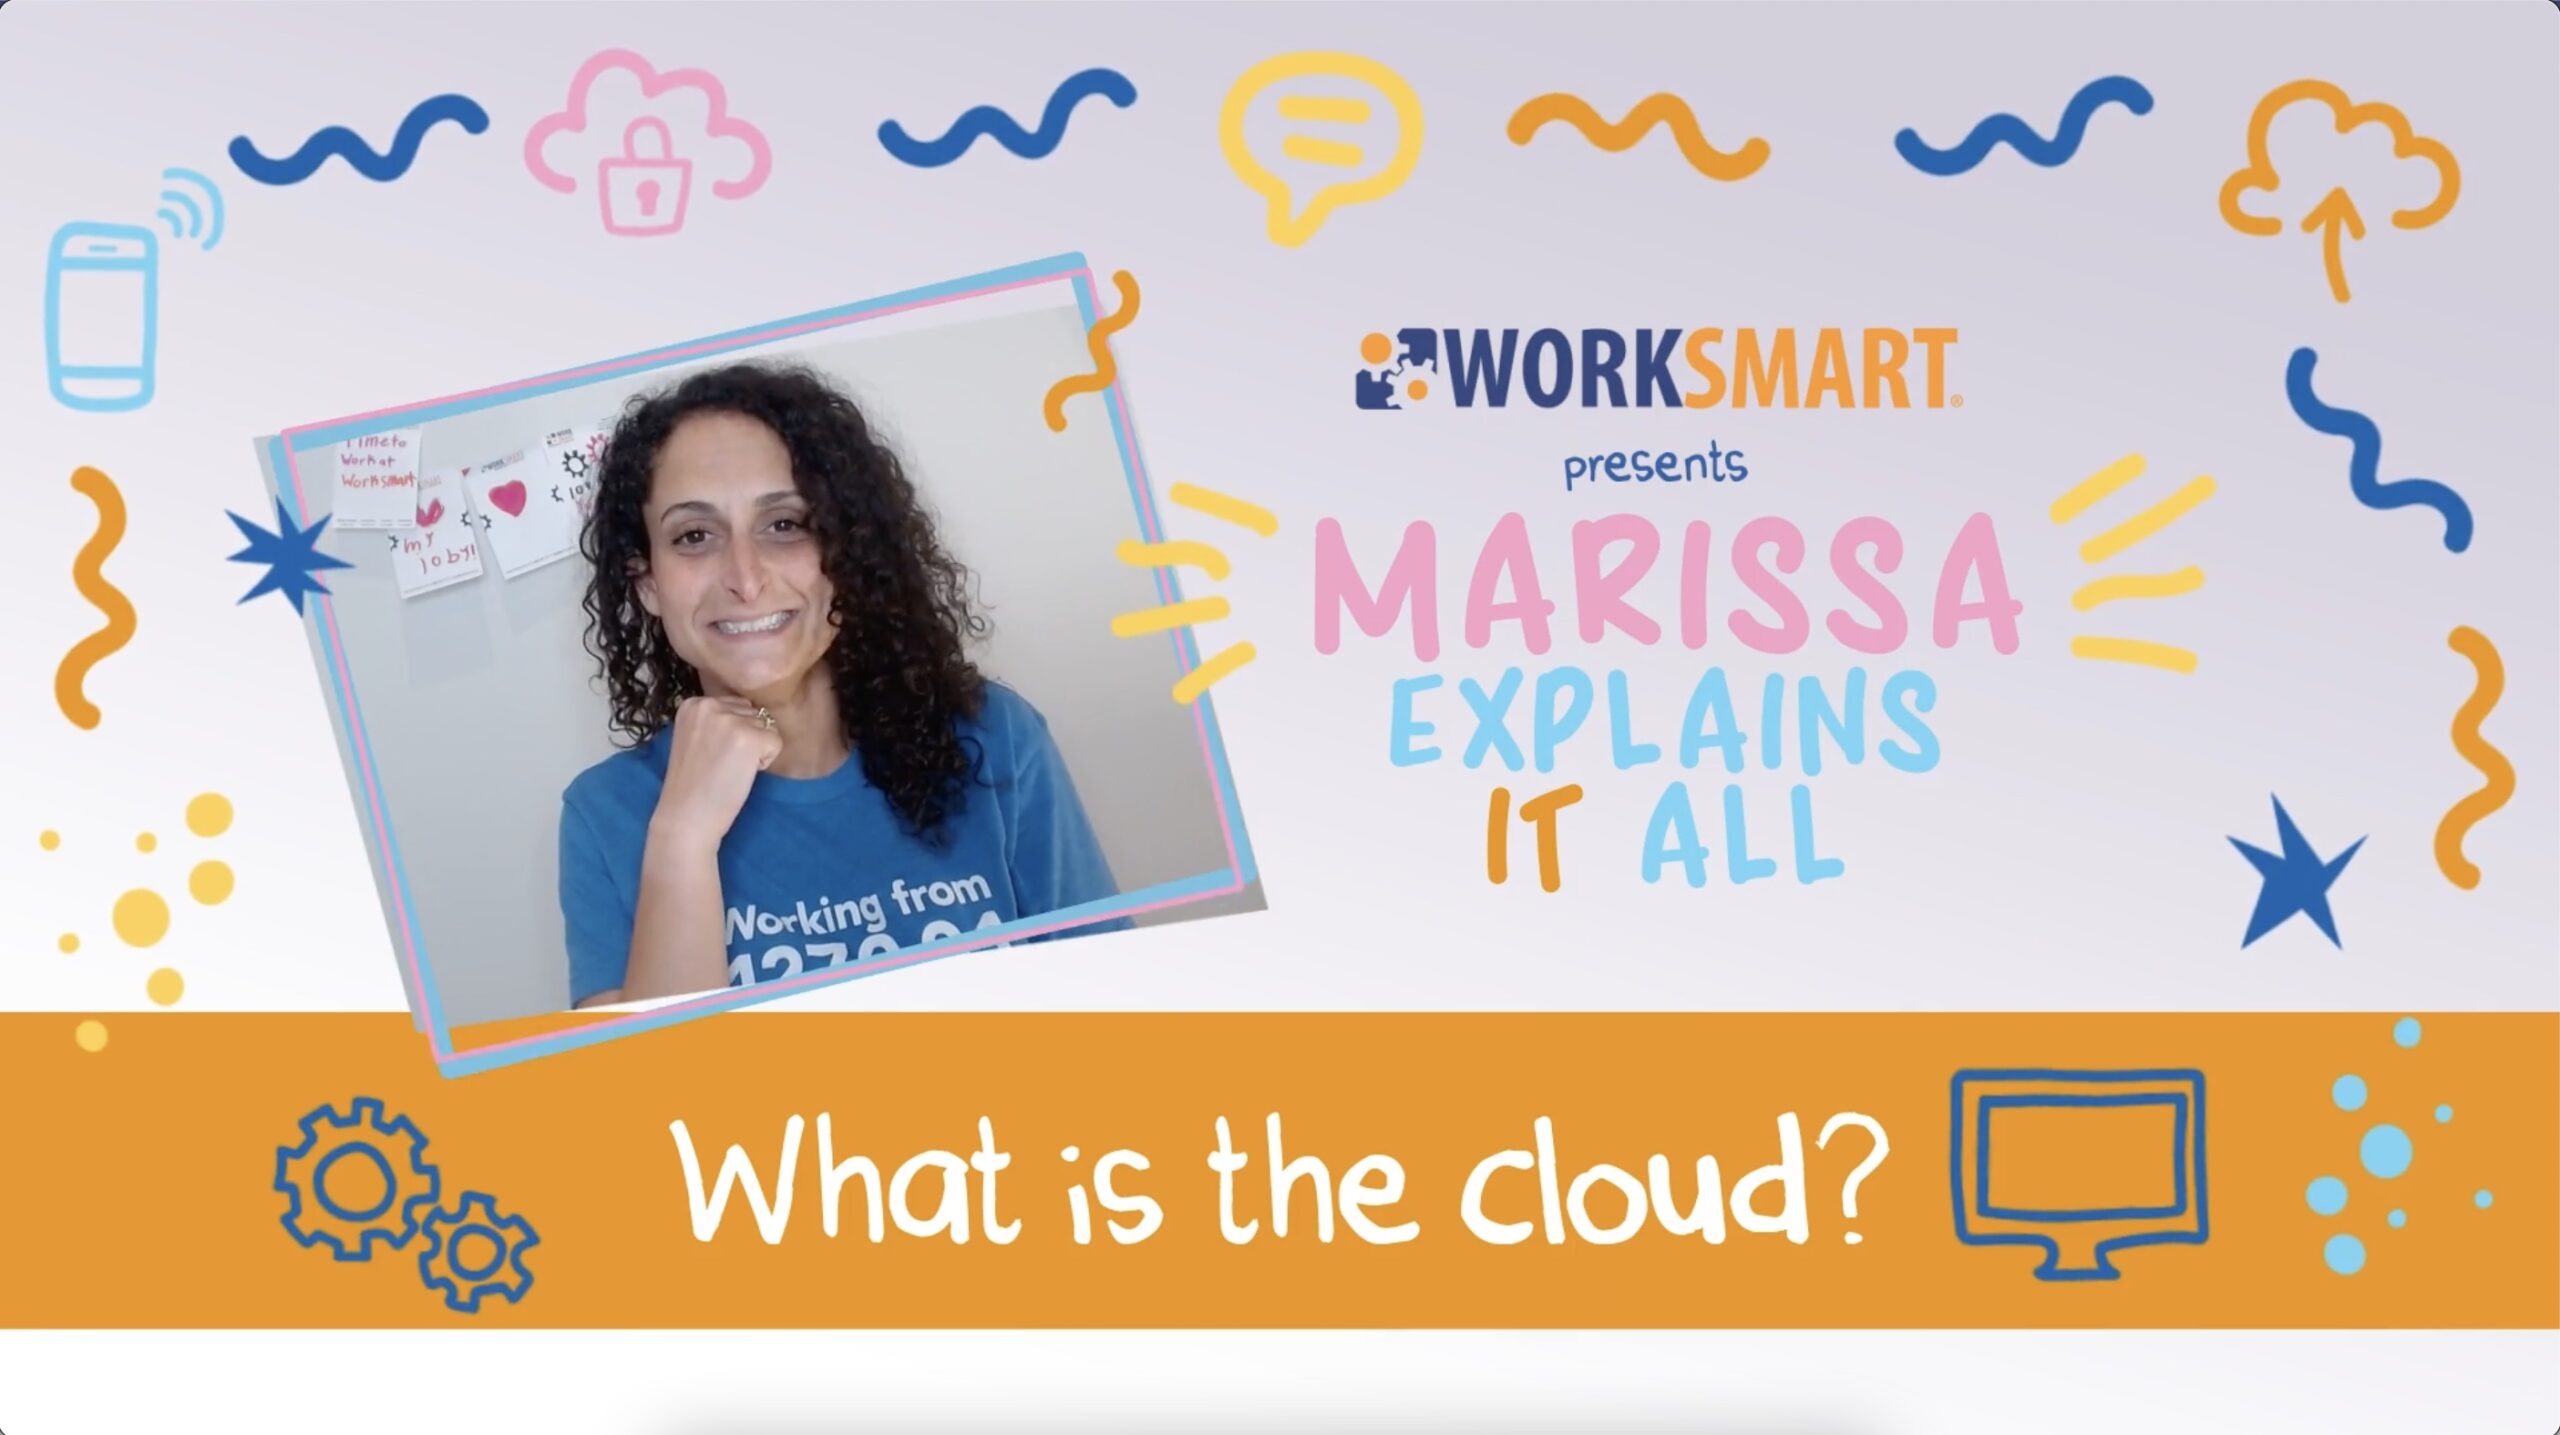 Marissa Explains IT All: What is the cloud?